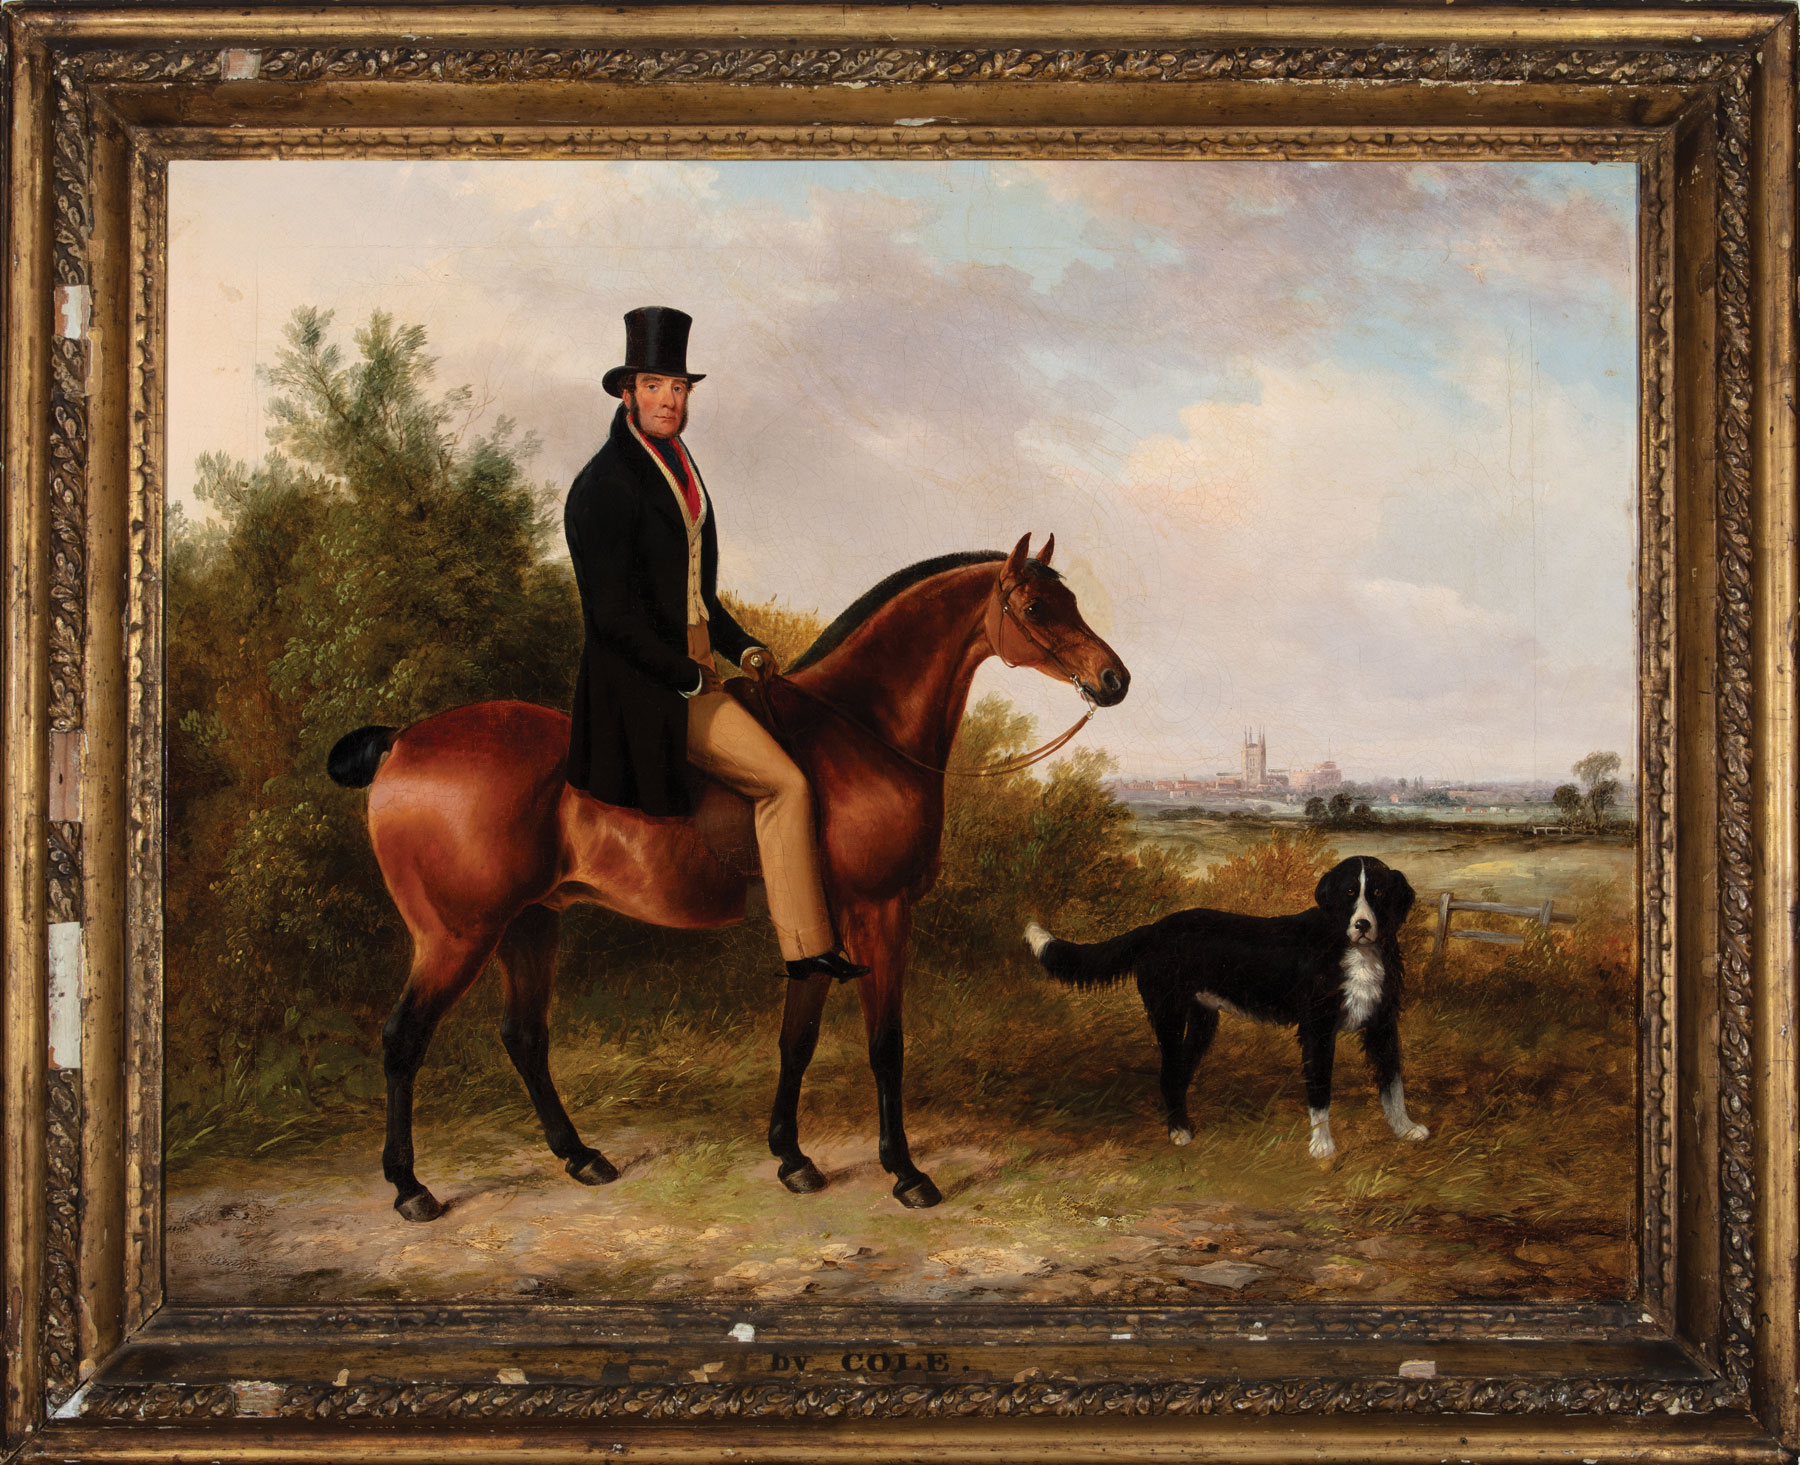 George Cole (British, 1810-1885), "John Peale on his Favorite Hunter and a Dog", oil on canvas,